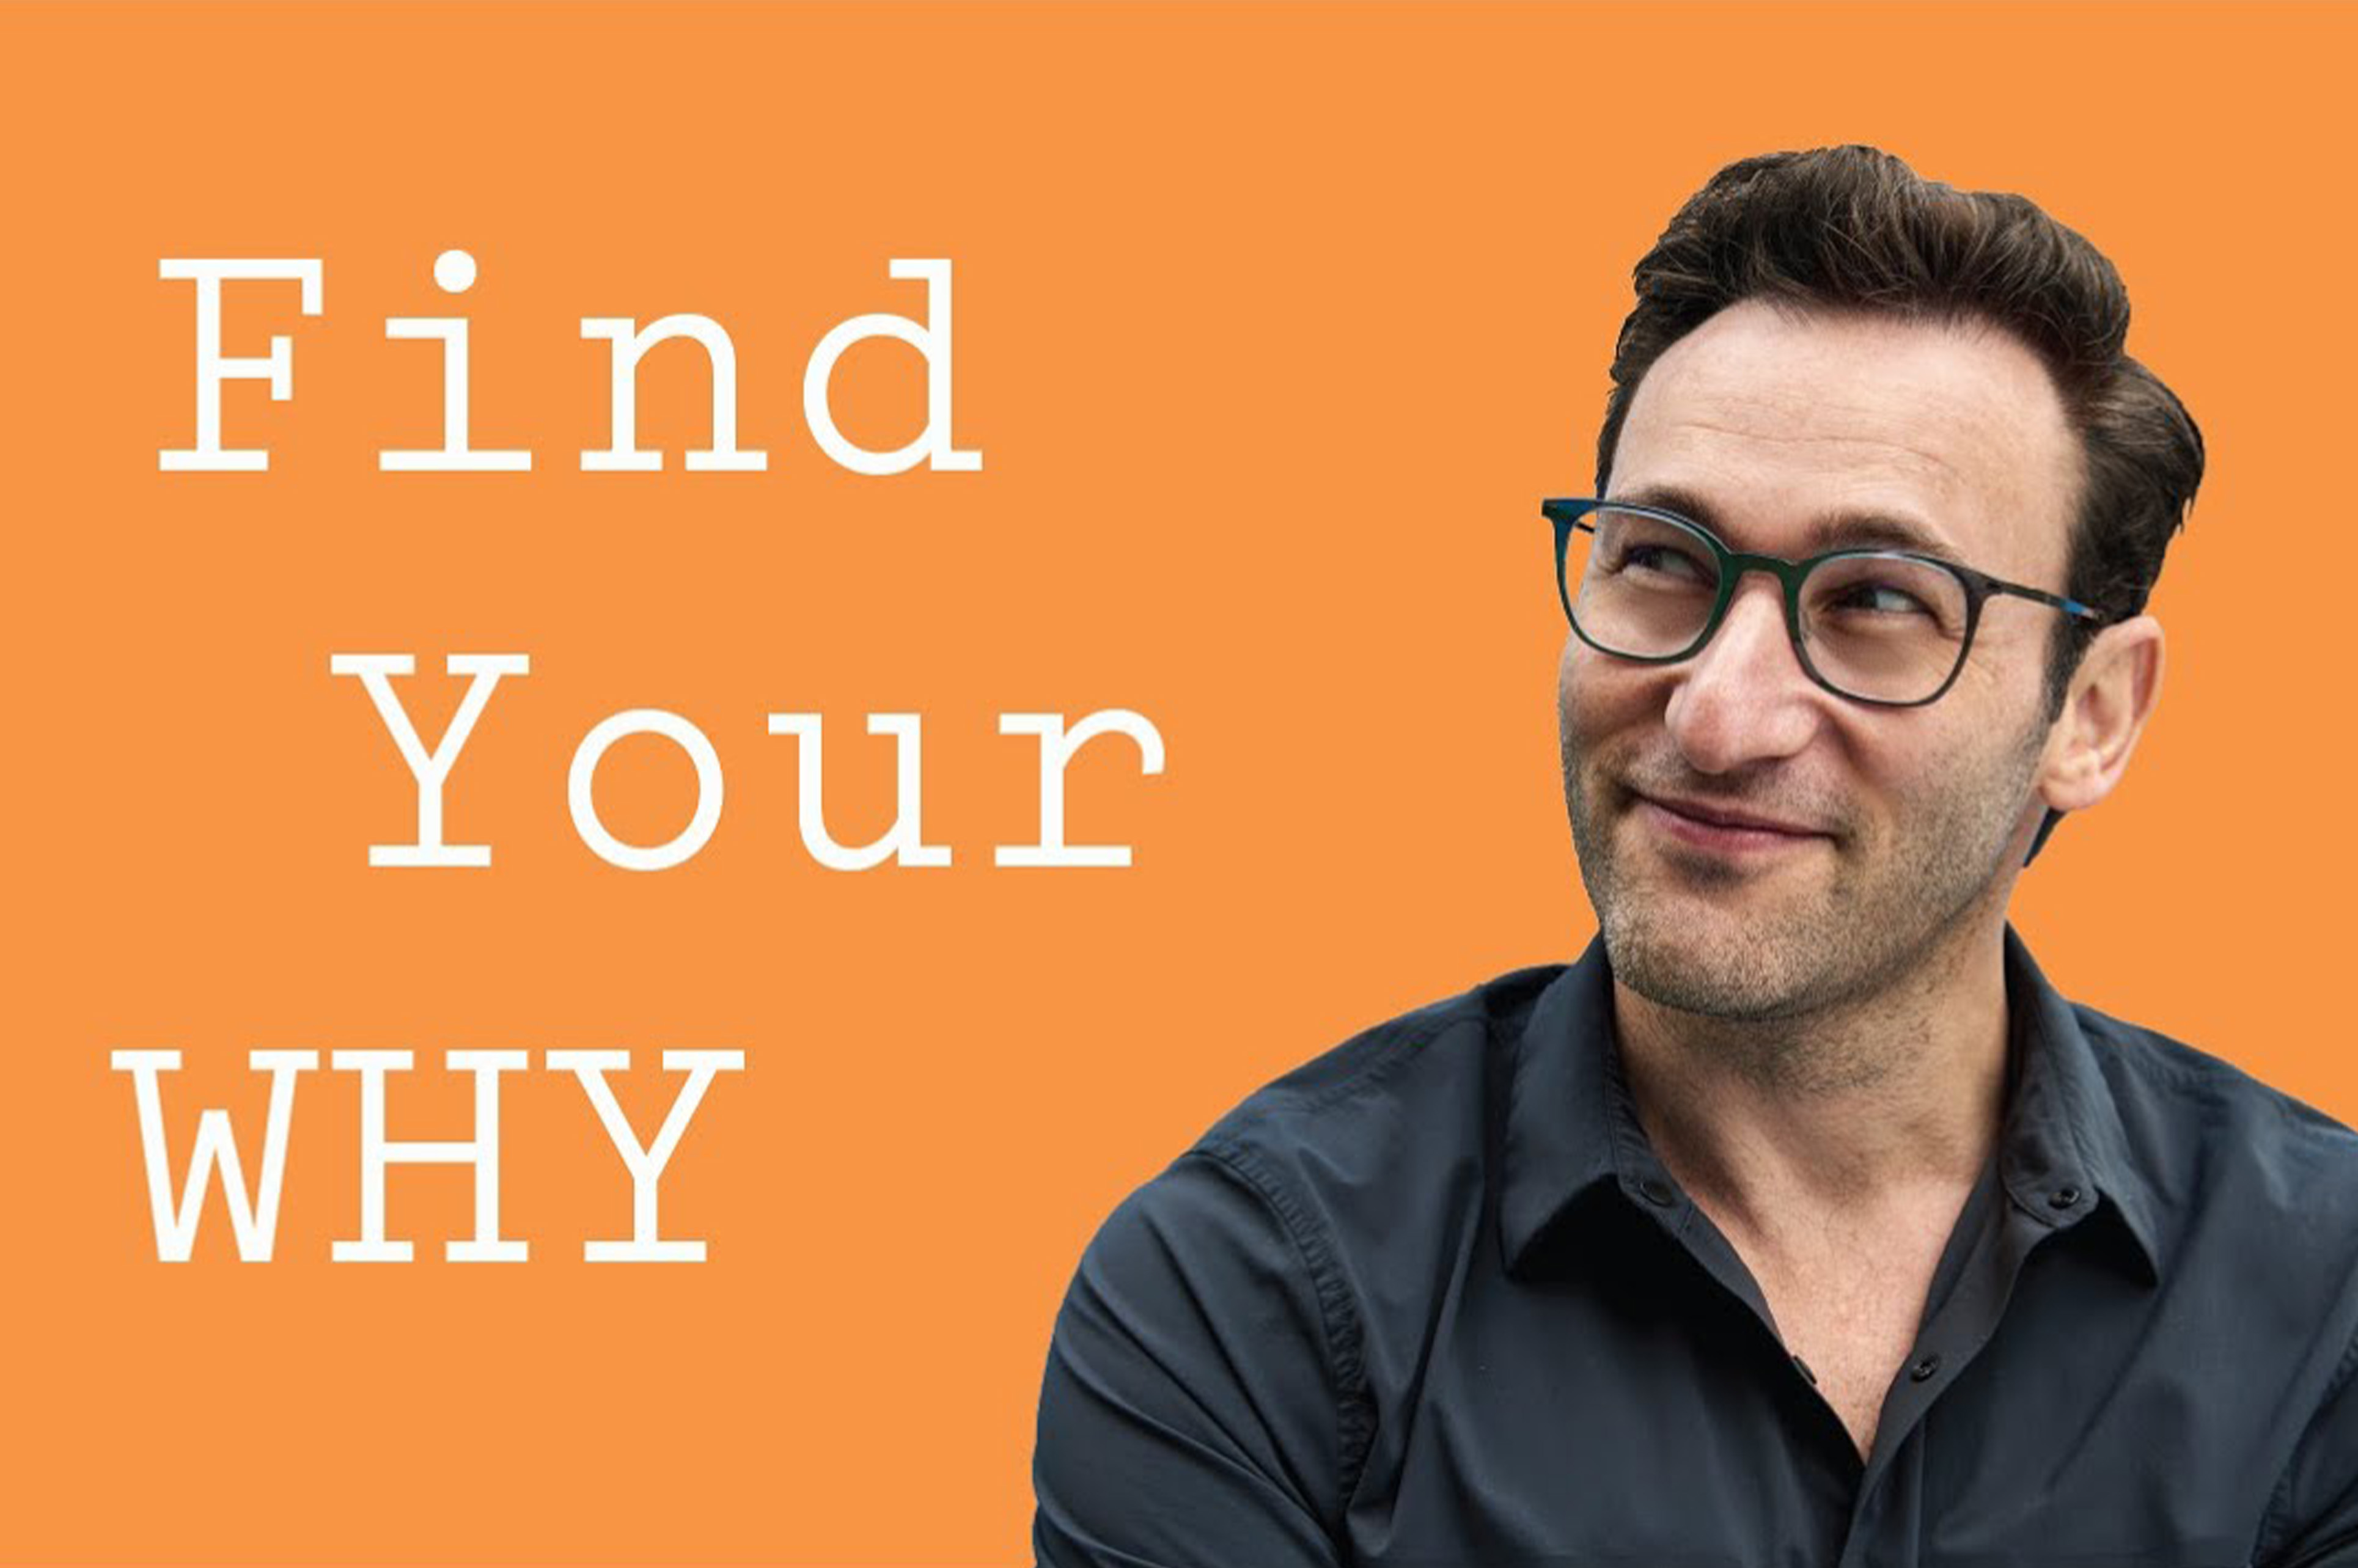 Pictue of Simon Sinek on the presenting on the stage